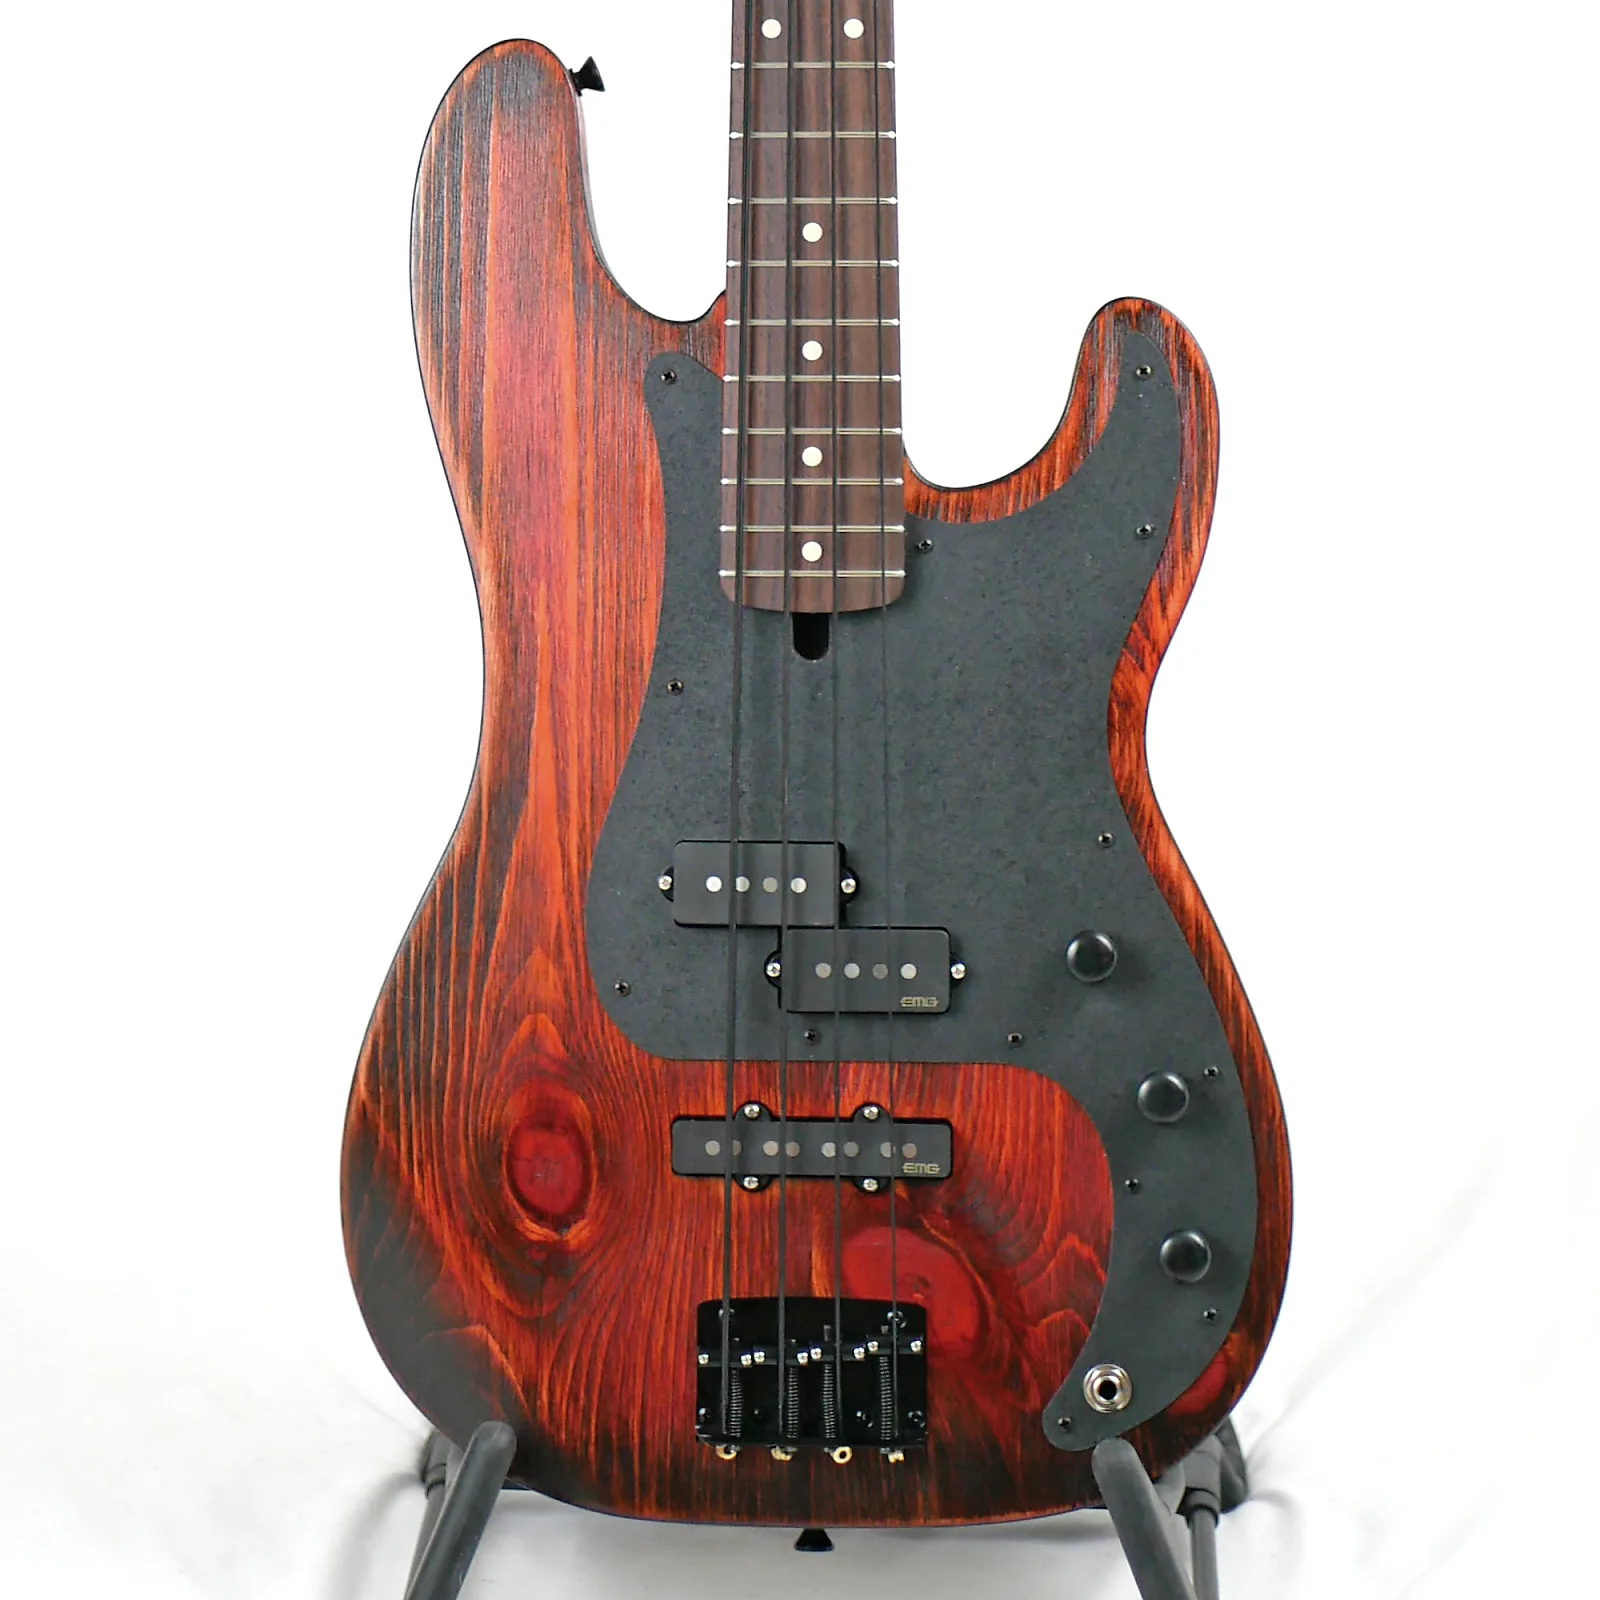 Image is of the front of a Pamela PJ 34" Long-Scale Bass in Tangerine Dream on Distressed Pine with EMG Geezer Butler PJ Pickups